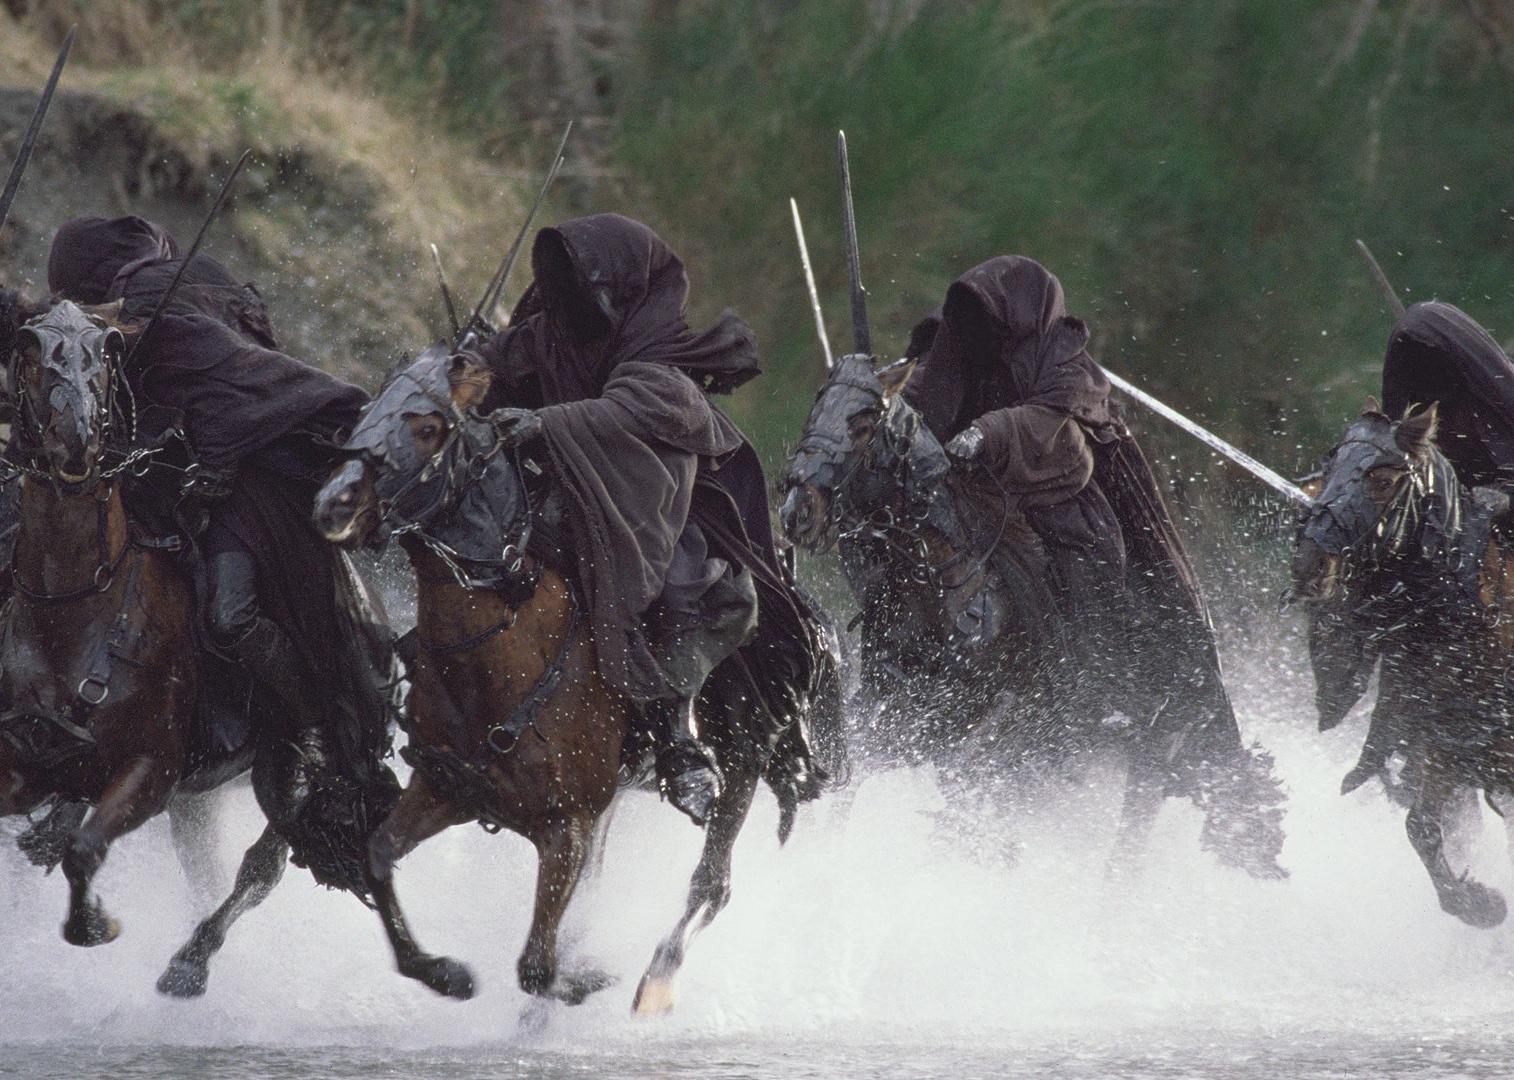 Horses run through water with riders who have their heads covered in black cloth.